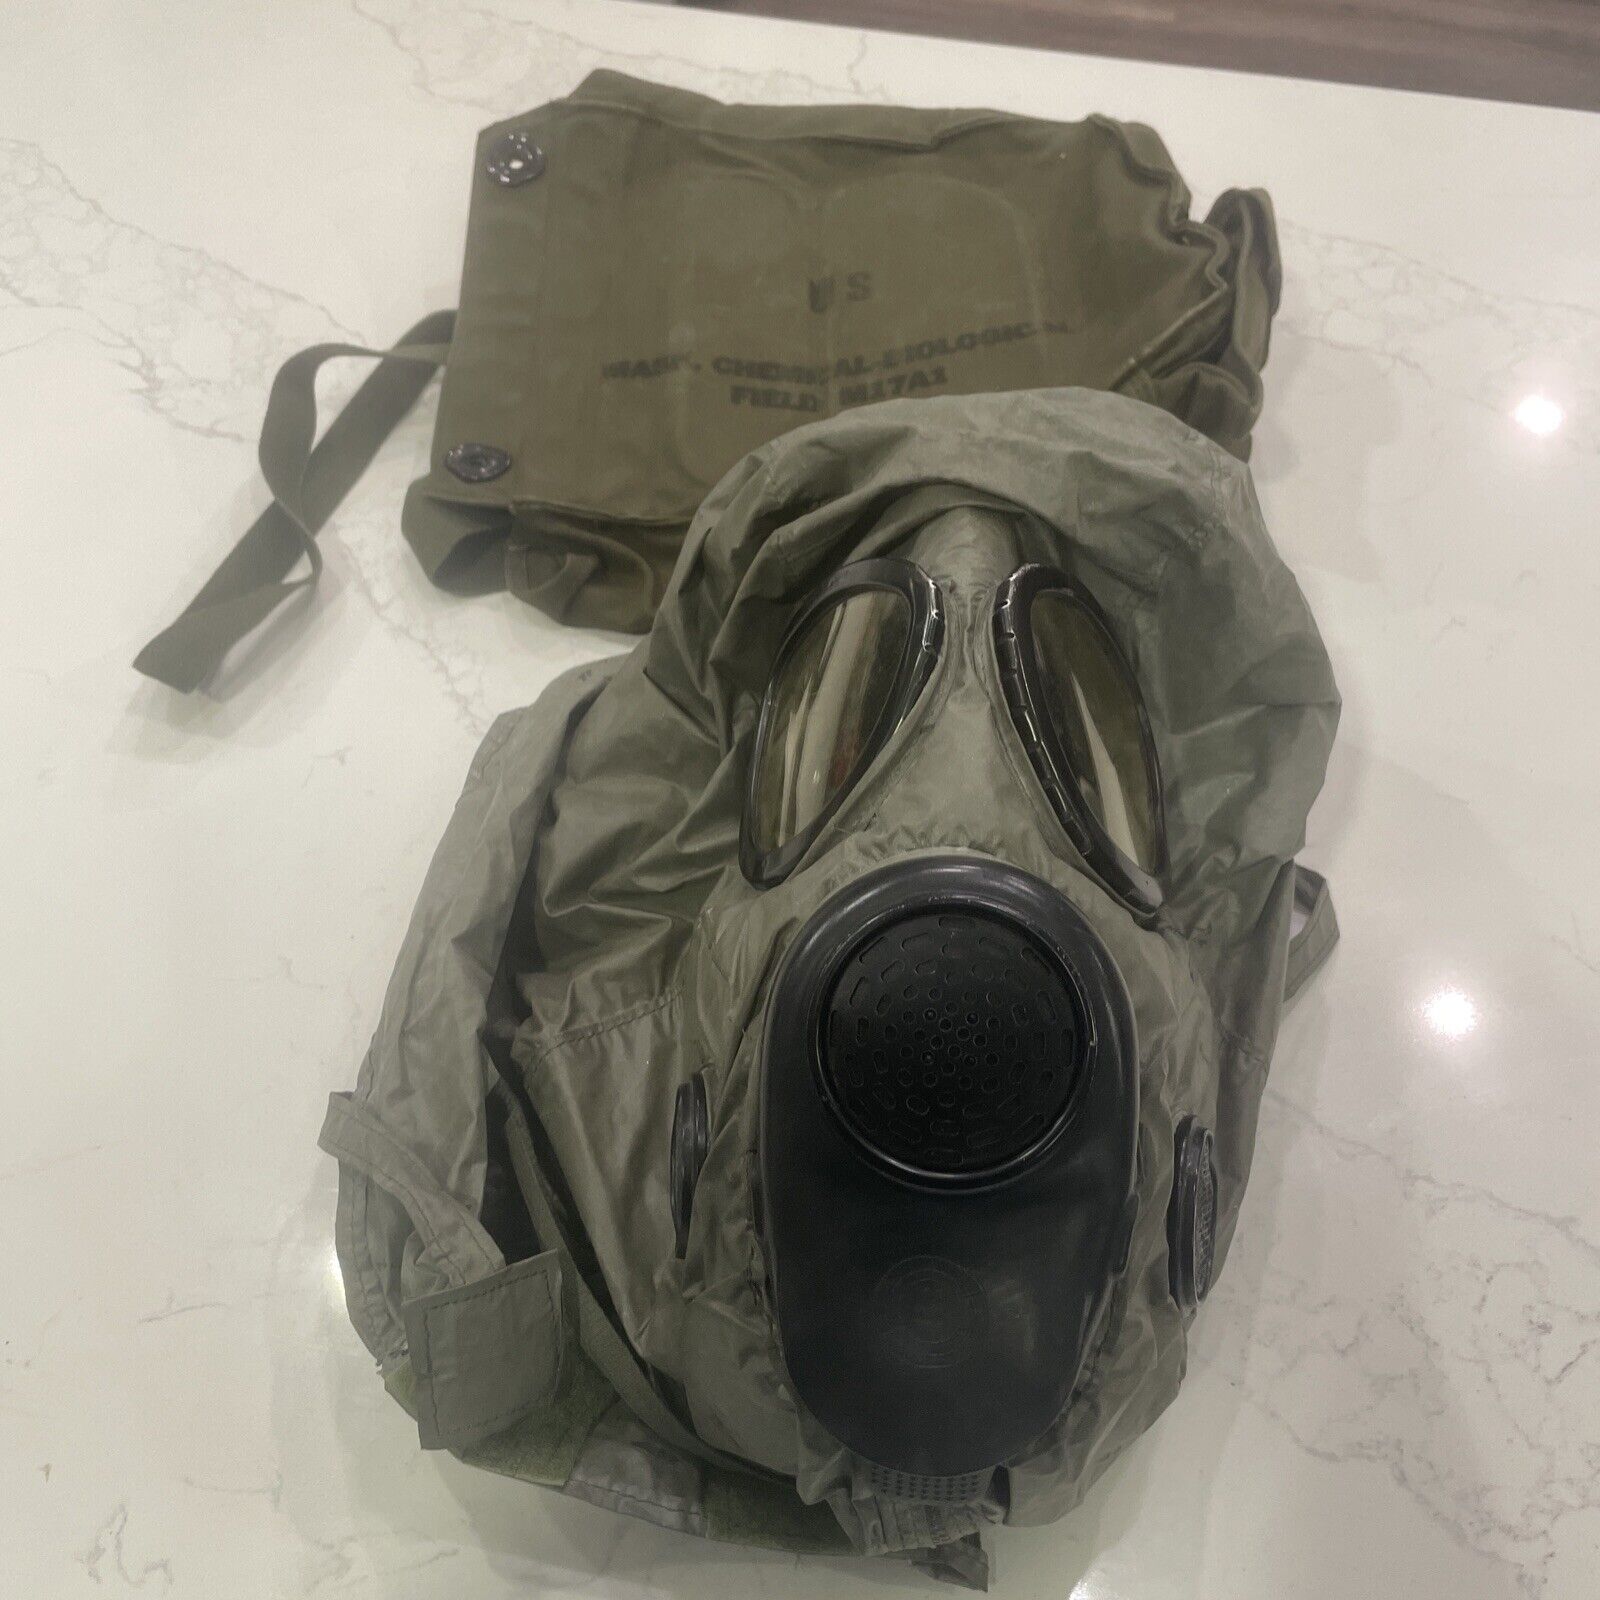 Vintage US Army M17A1 Military Gas Mask w/ Canvas Carry Bag & Strap Med